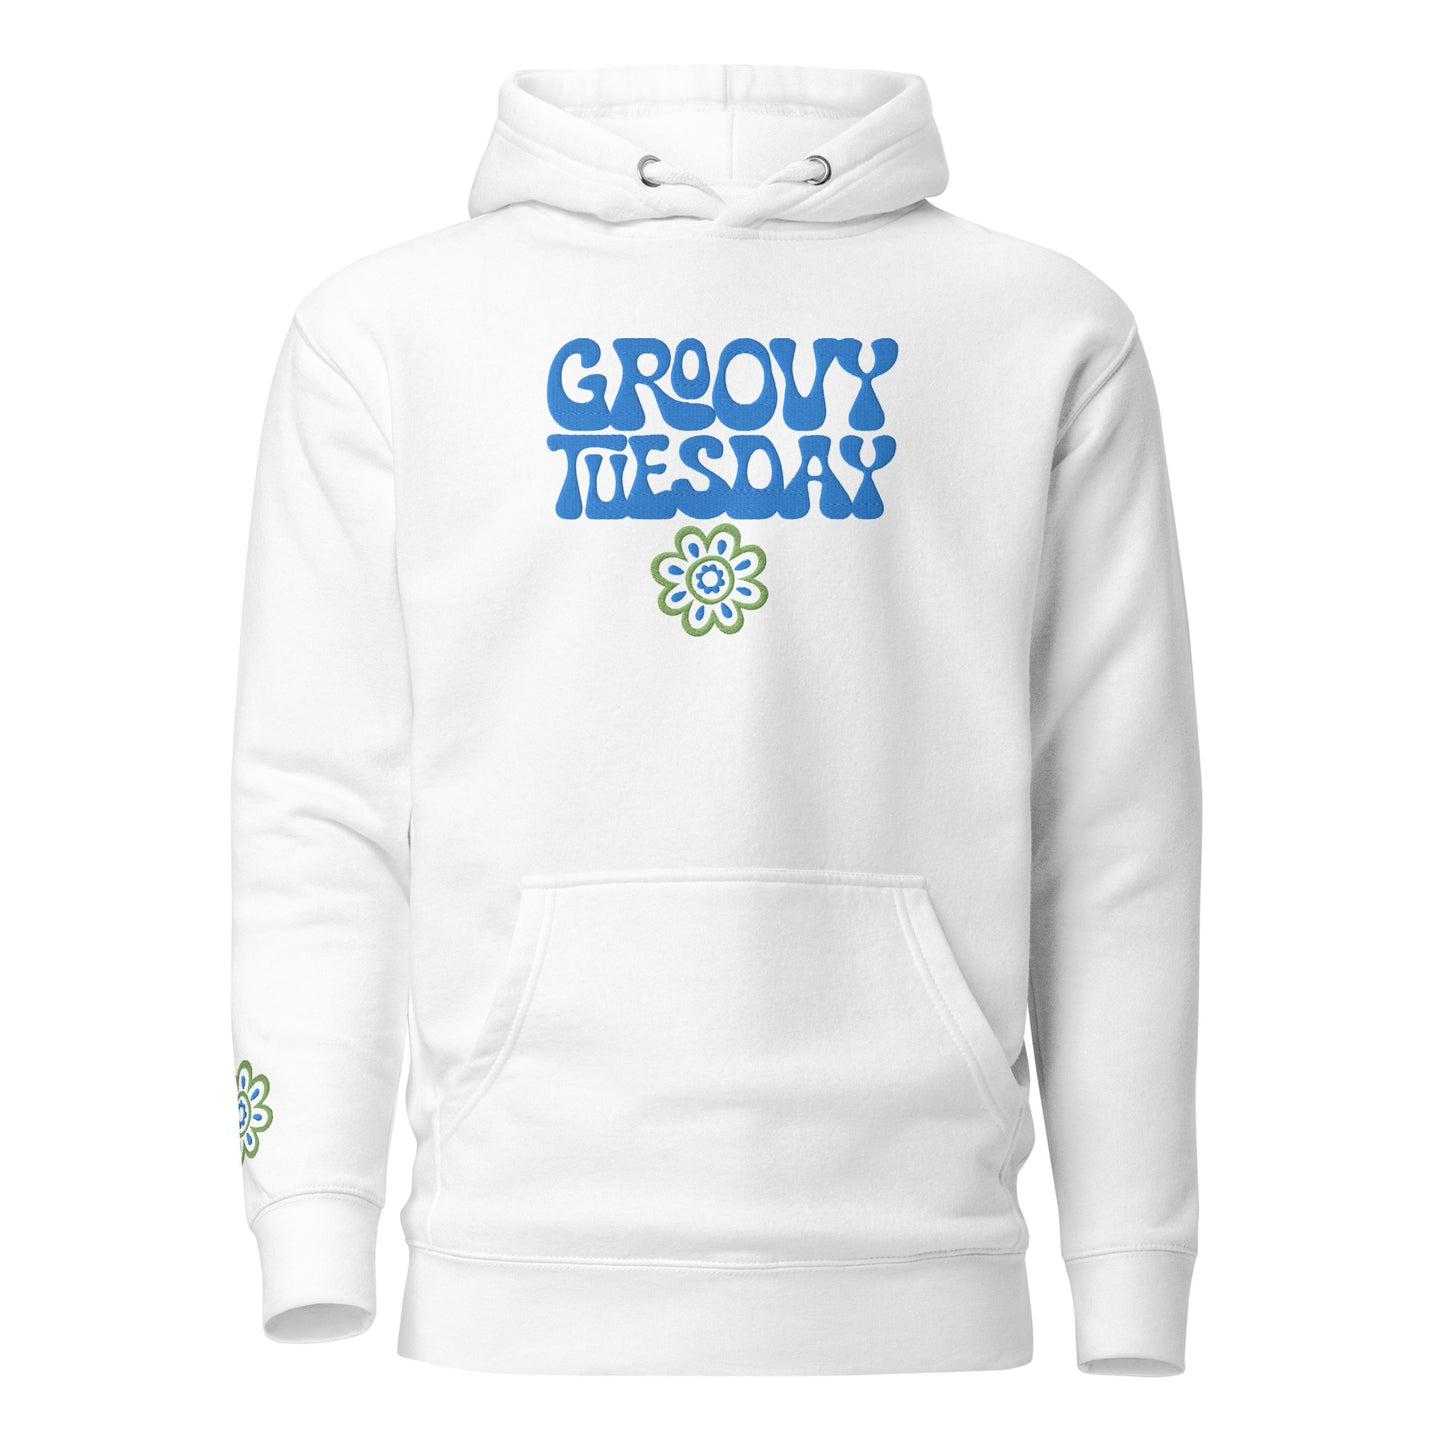 Groovy Tuesday Unisex Embroidered Hoodie (White/Blue)